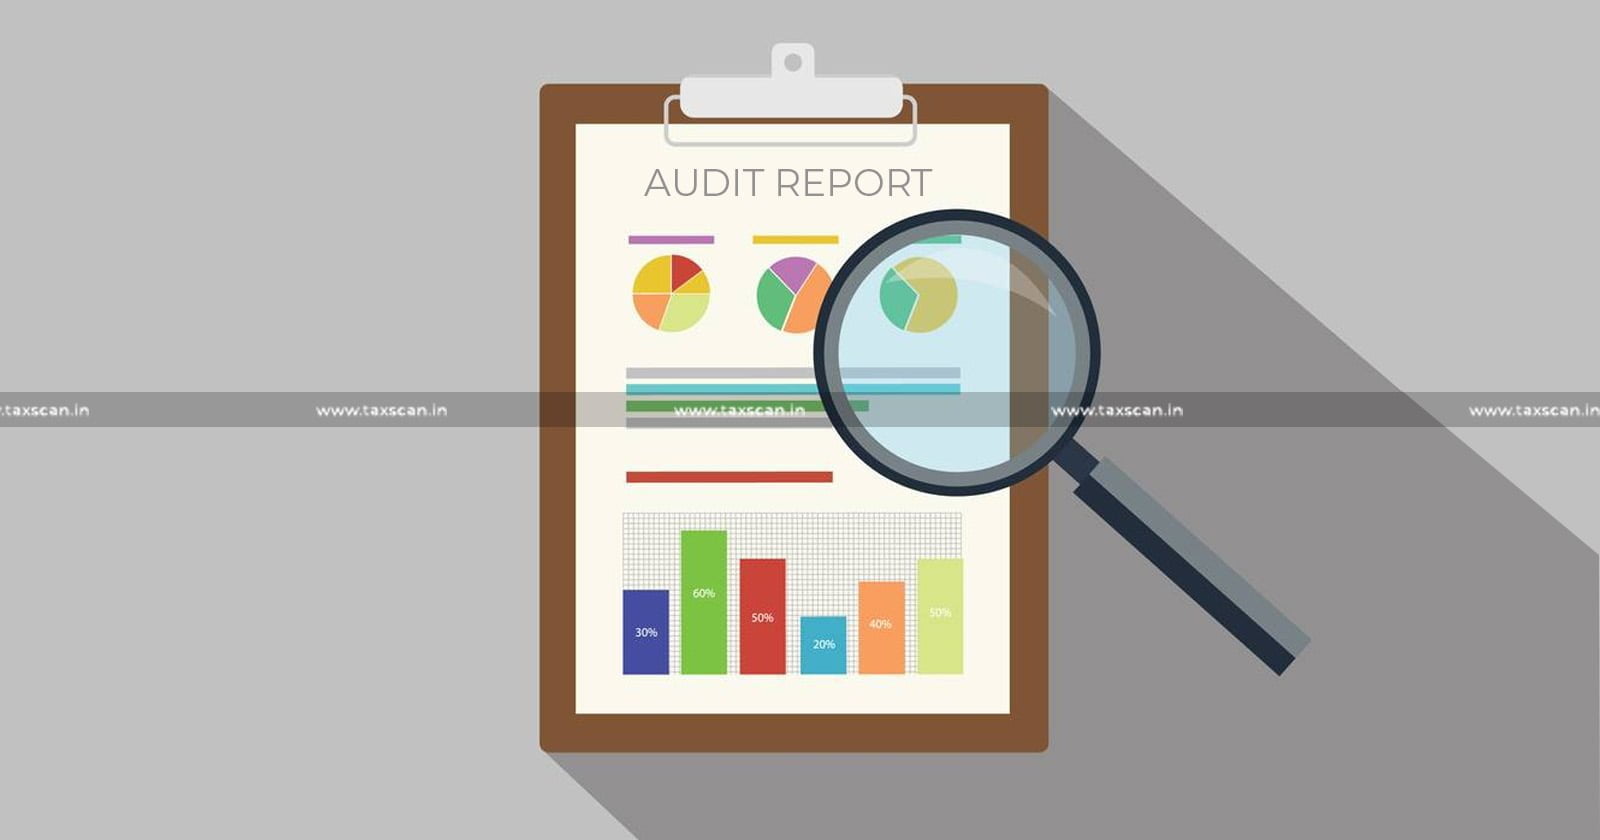 Auditor -Wrong- Disallowance- Sum- Income Tax Act- Audit Report-income tax-taxscan